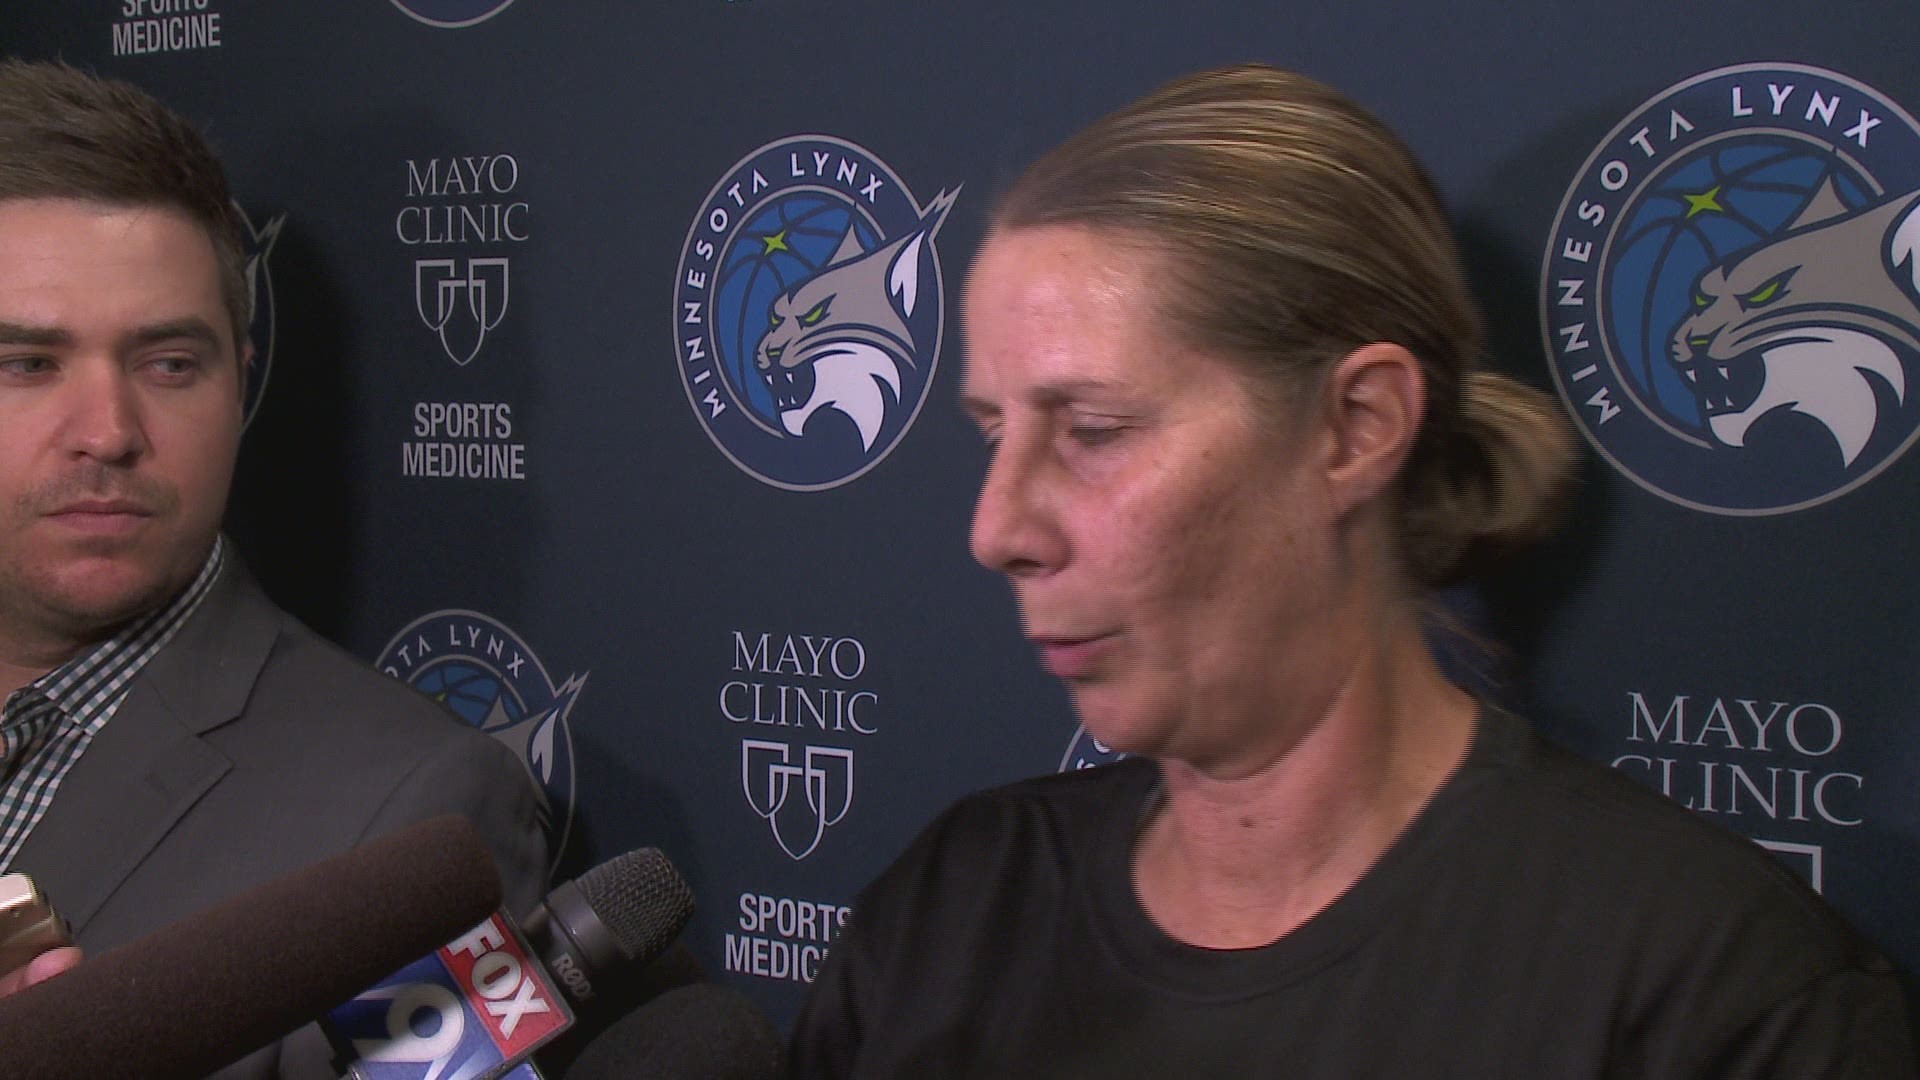 The Lynx finding new leadership in familiar faces.